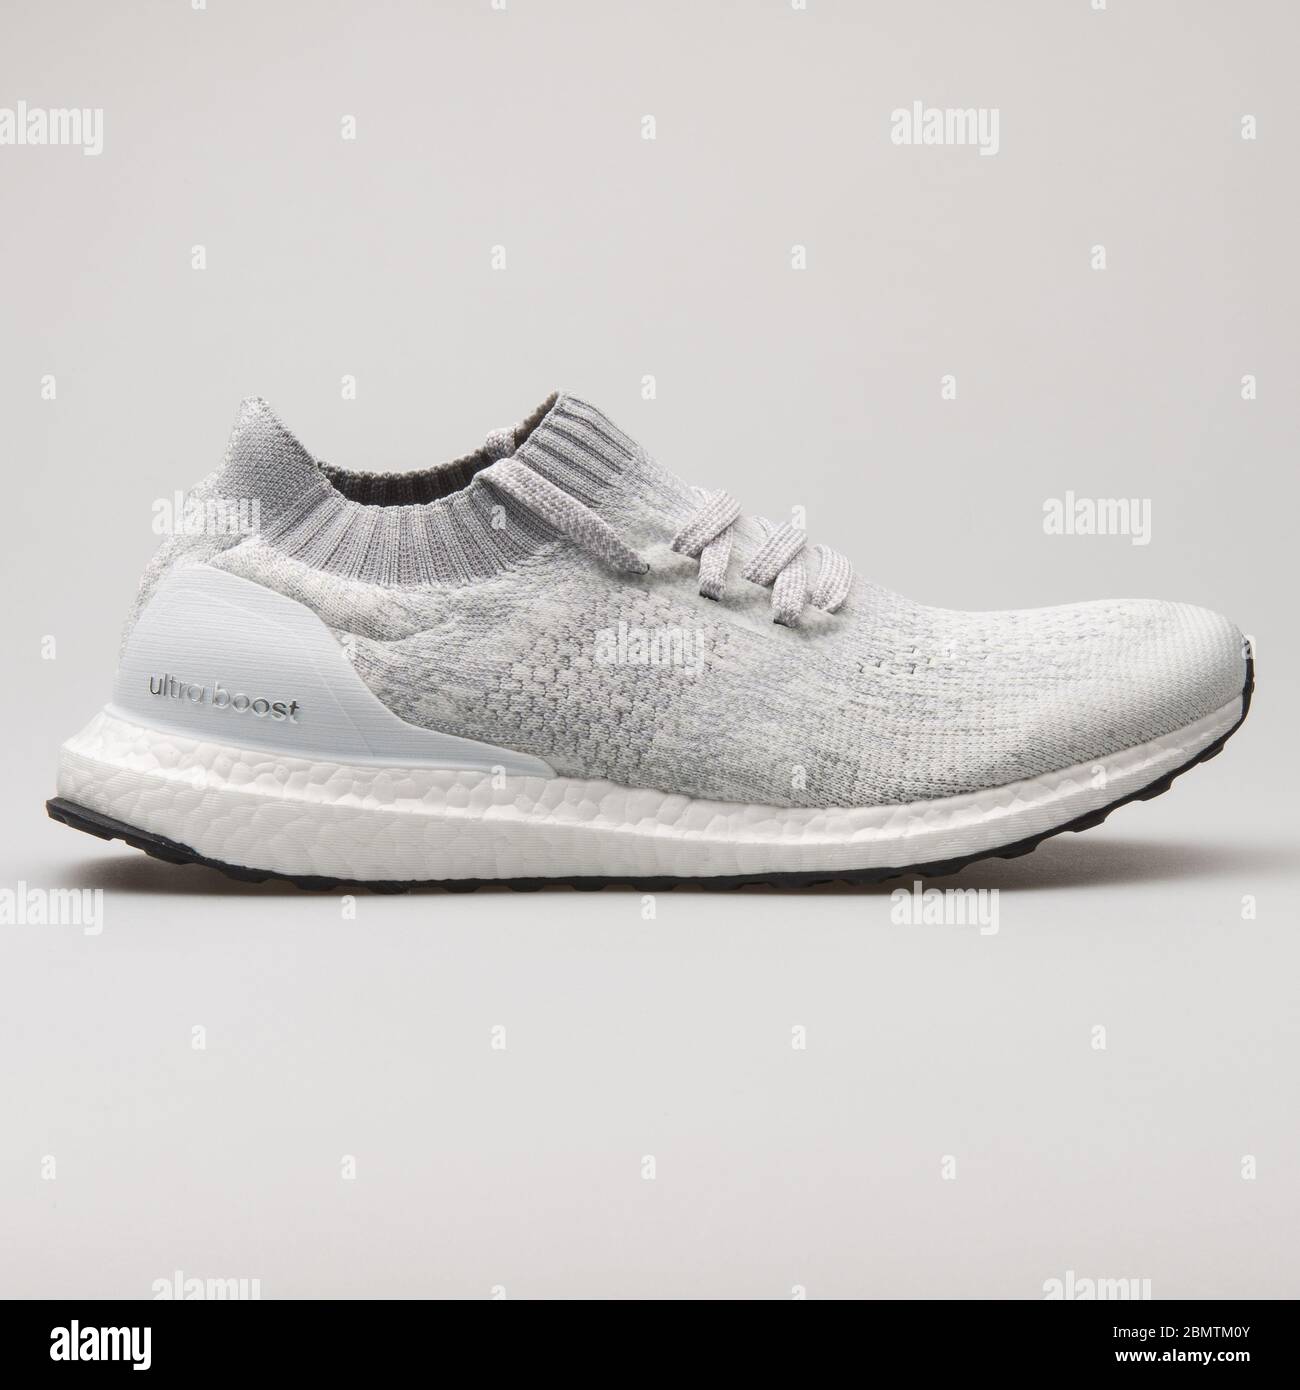 adidas ultra boost uncaged 2018